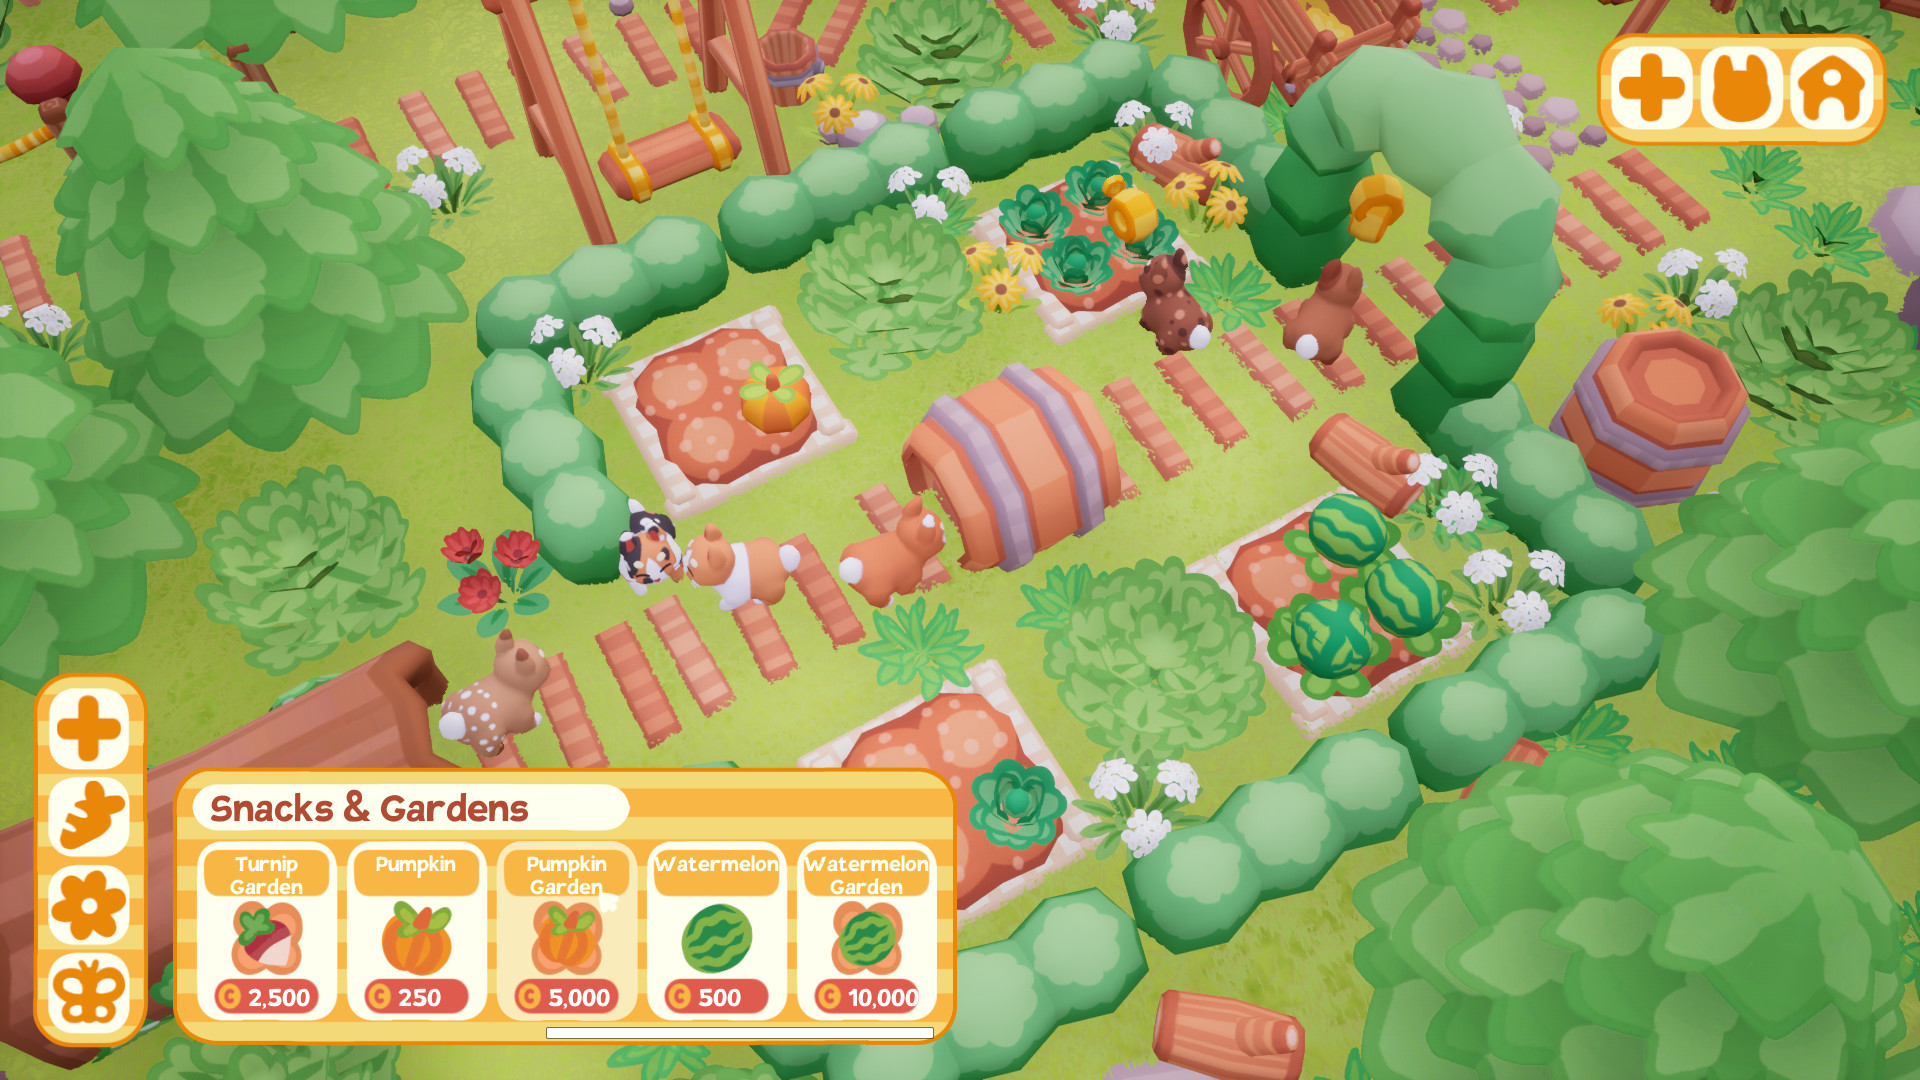 A screenshot from Bunny Park that show a garden filled with vegetables and bunnies.